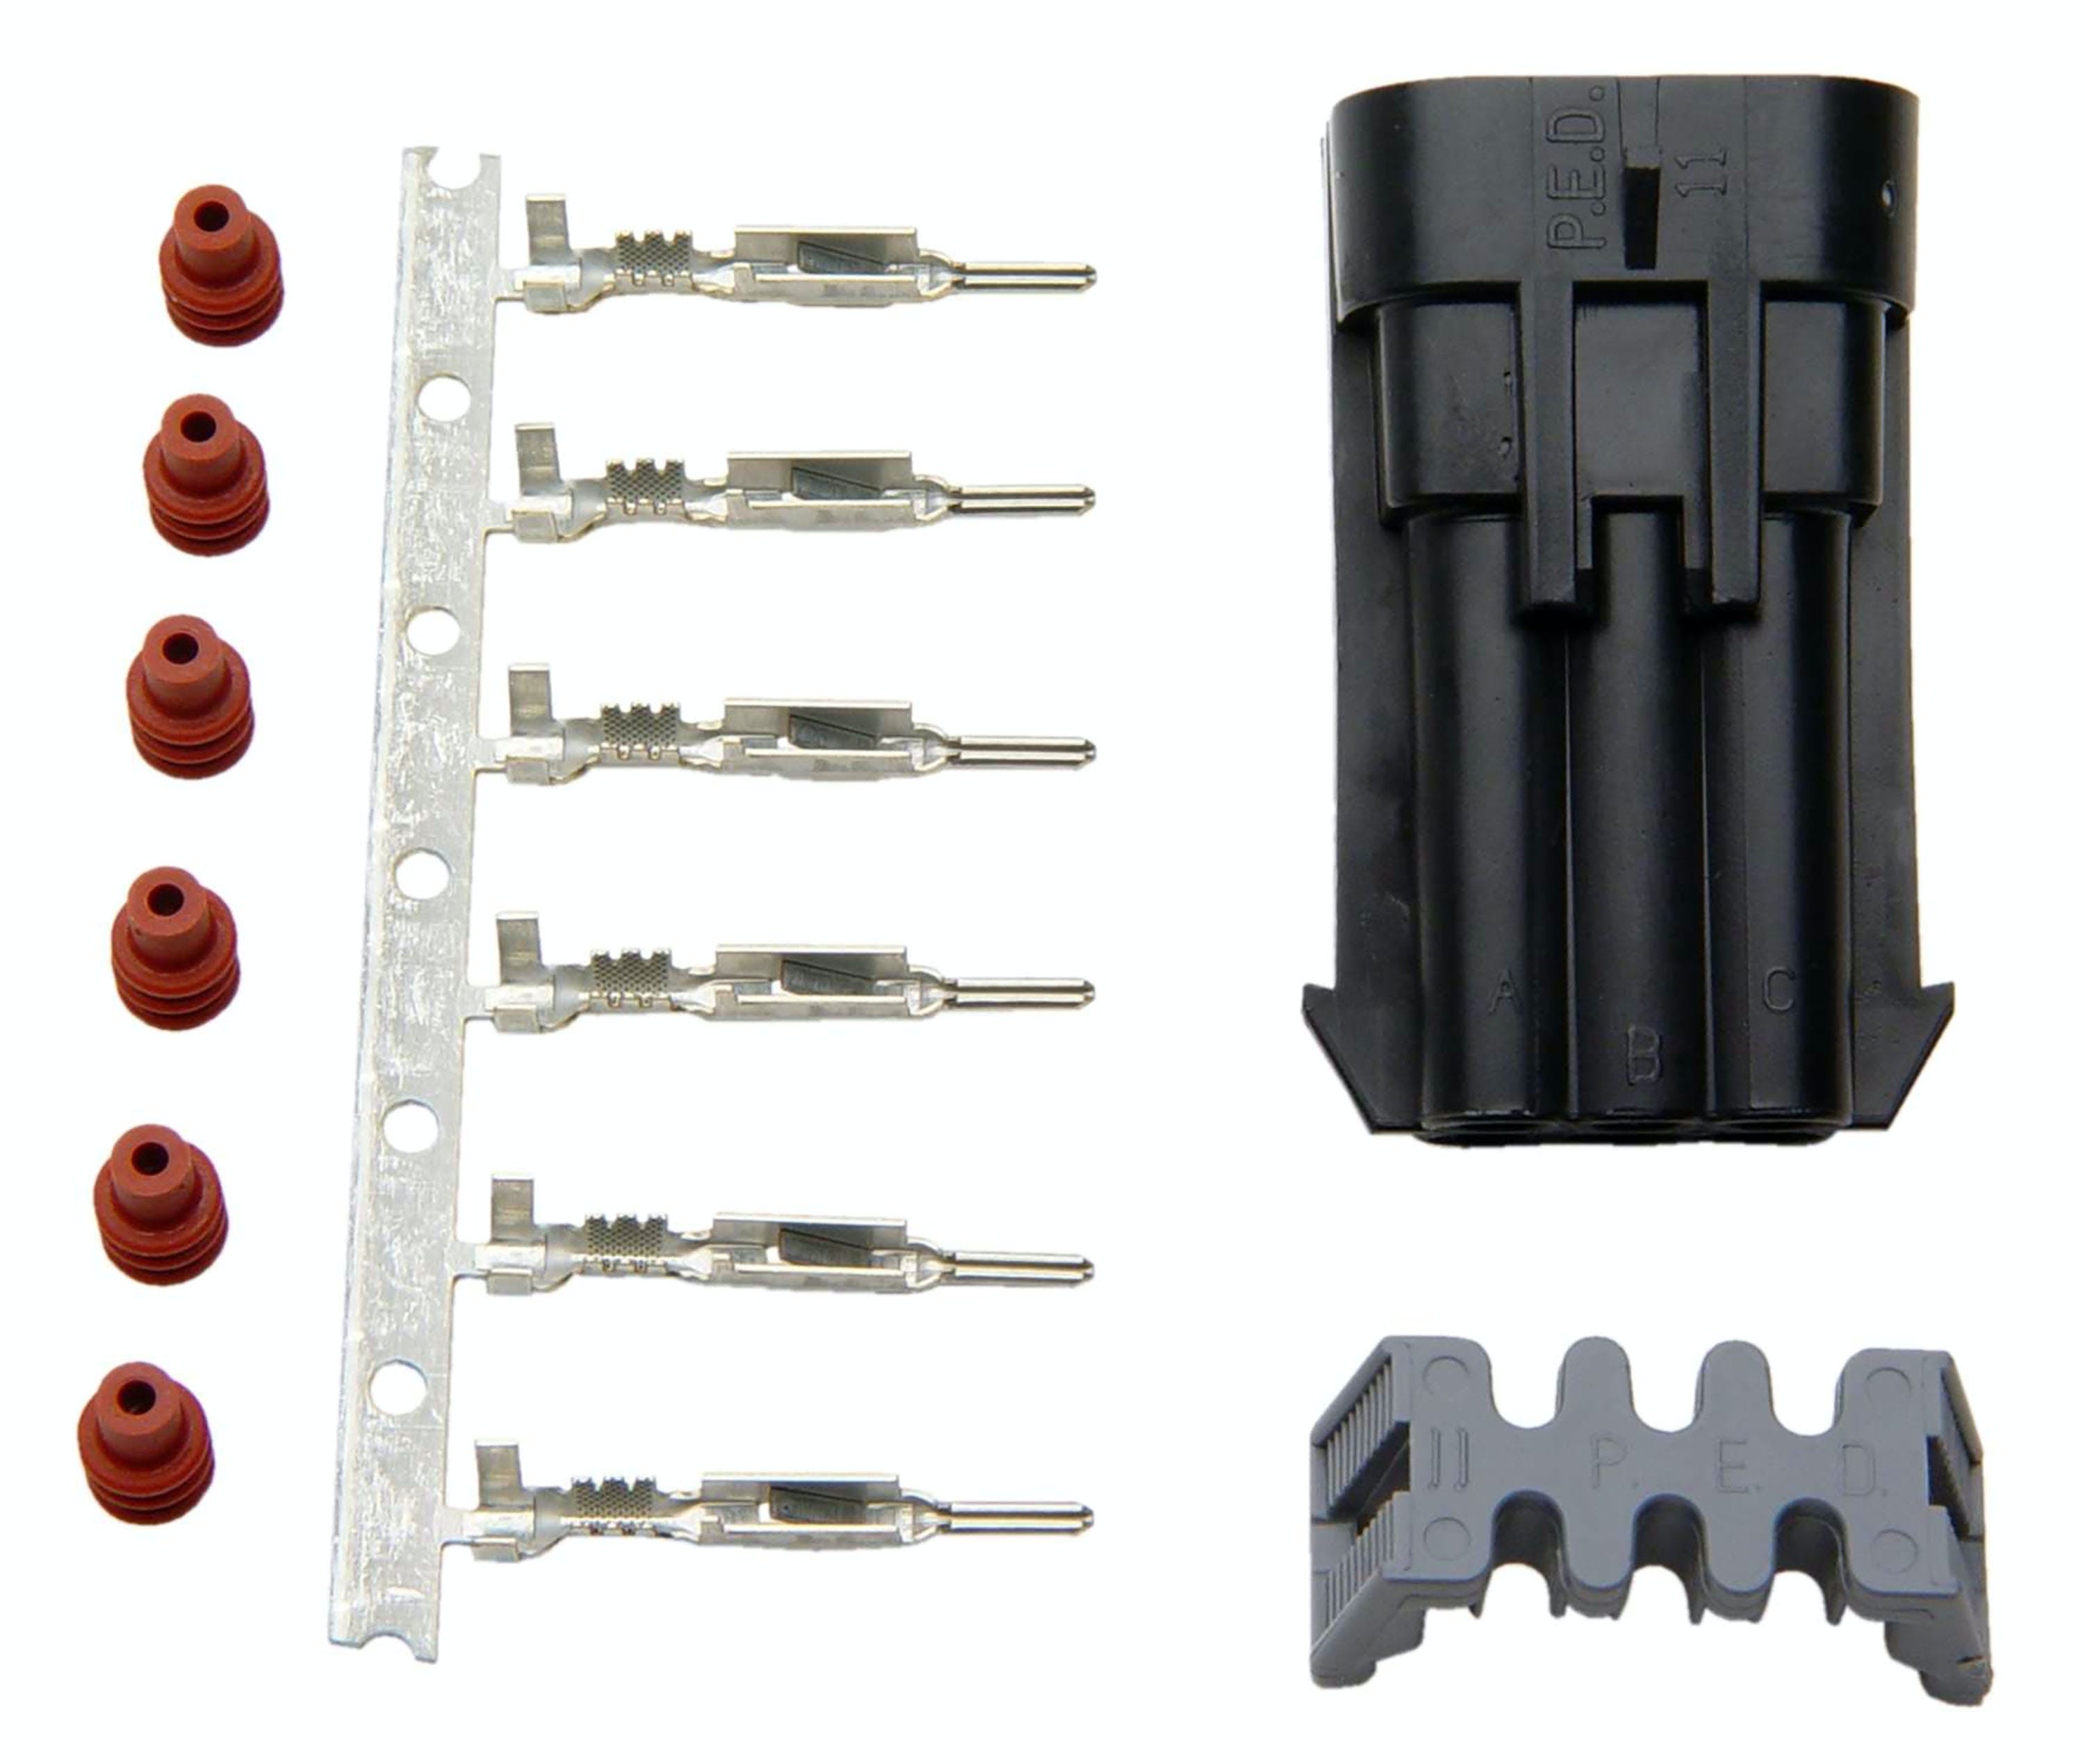 FAST - Fuel Air Spark Technology 301400K FAST Power Adder Connector Kit for N20 and PA Enable/Hold Functionality